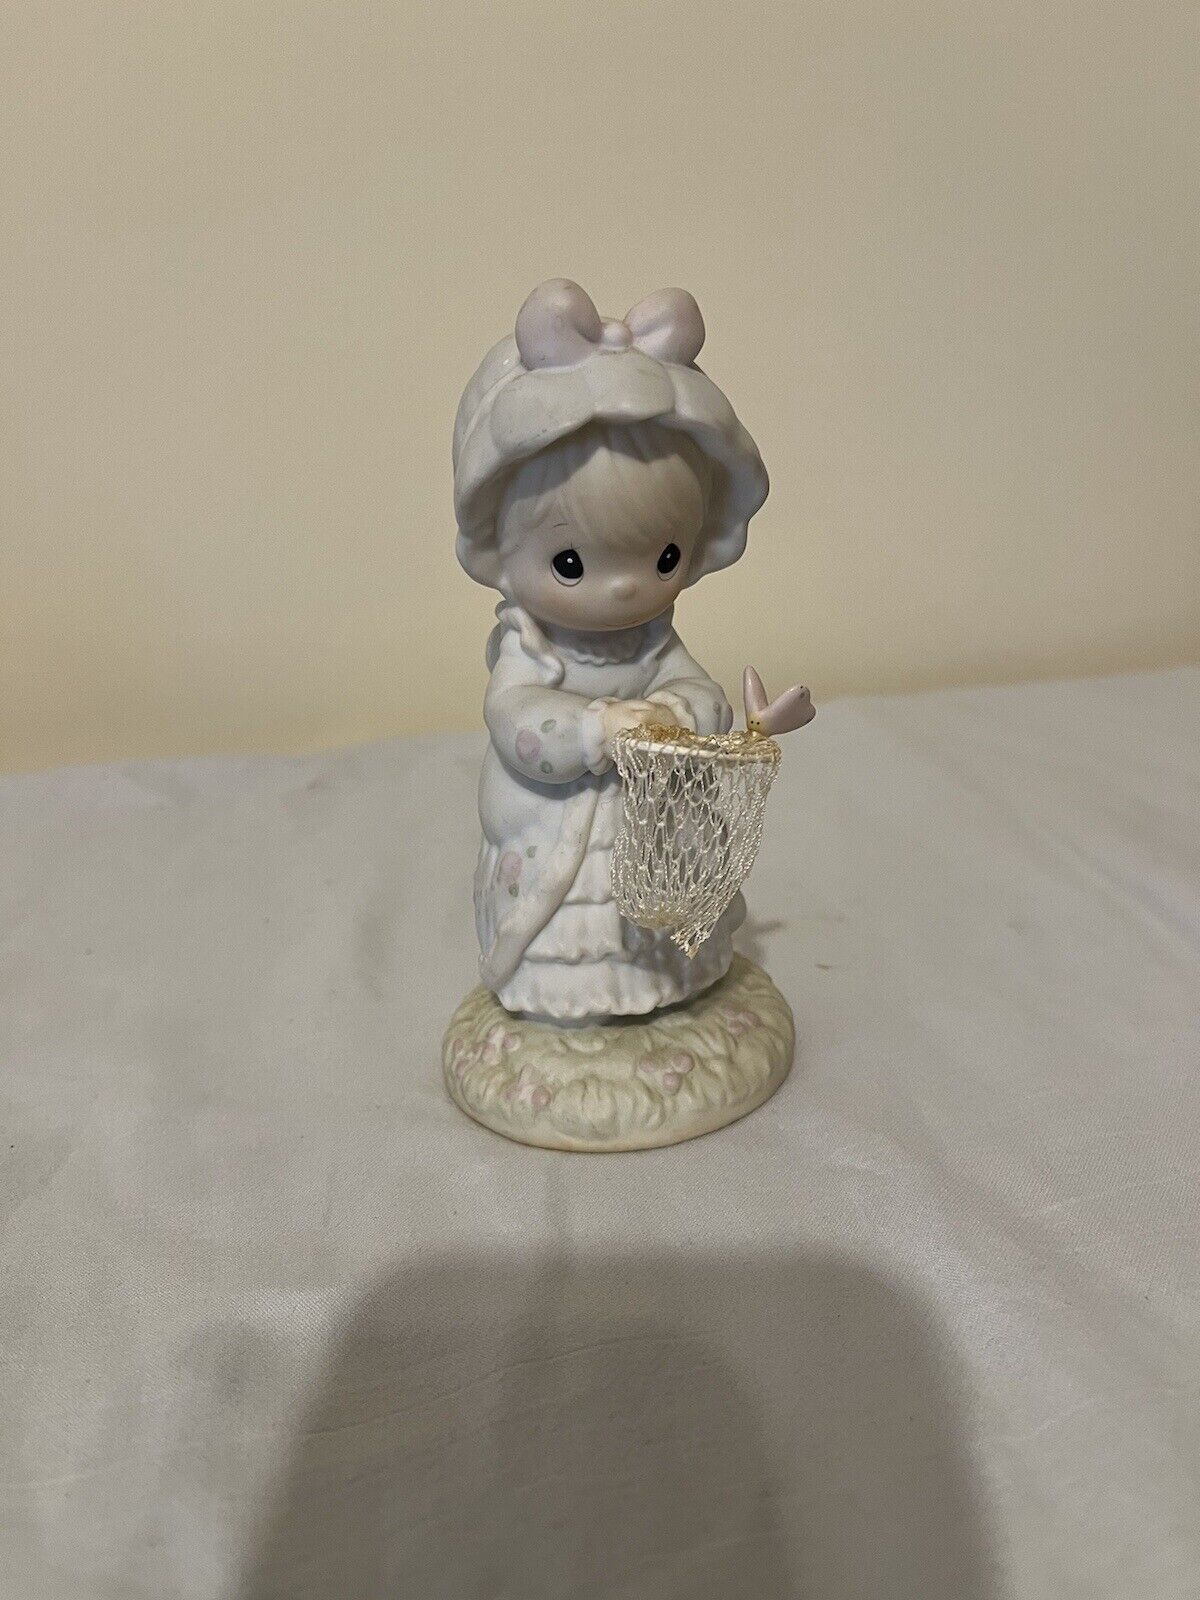 Precious Moments May Only Good Things Come Your Way Figurine with Butterfly Net